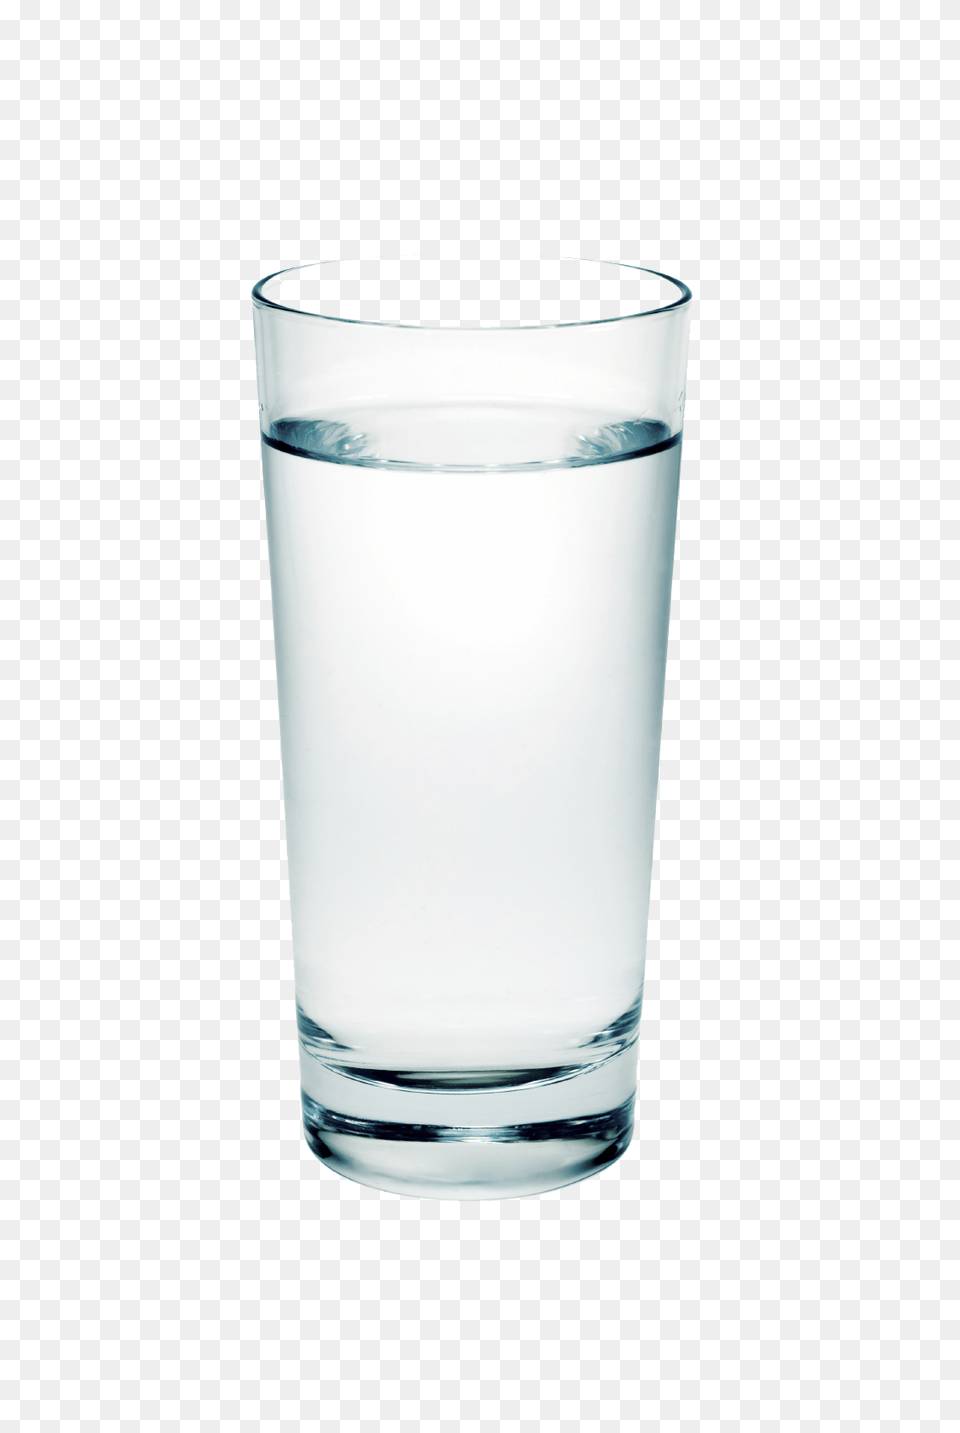 Download Hd Water Cup Pic Glass Of Water, Beverage, Milk, Bottle, Shaker Png